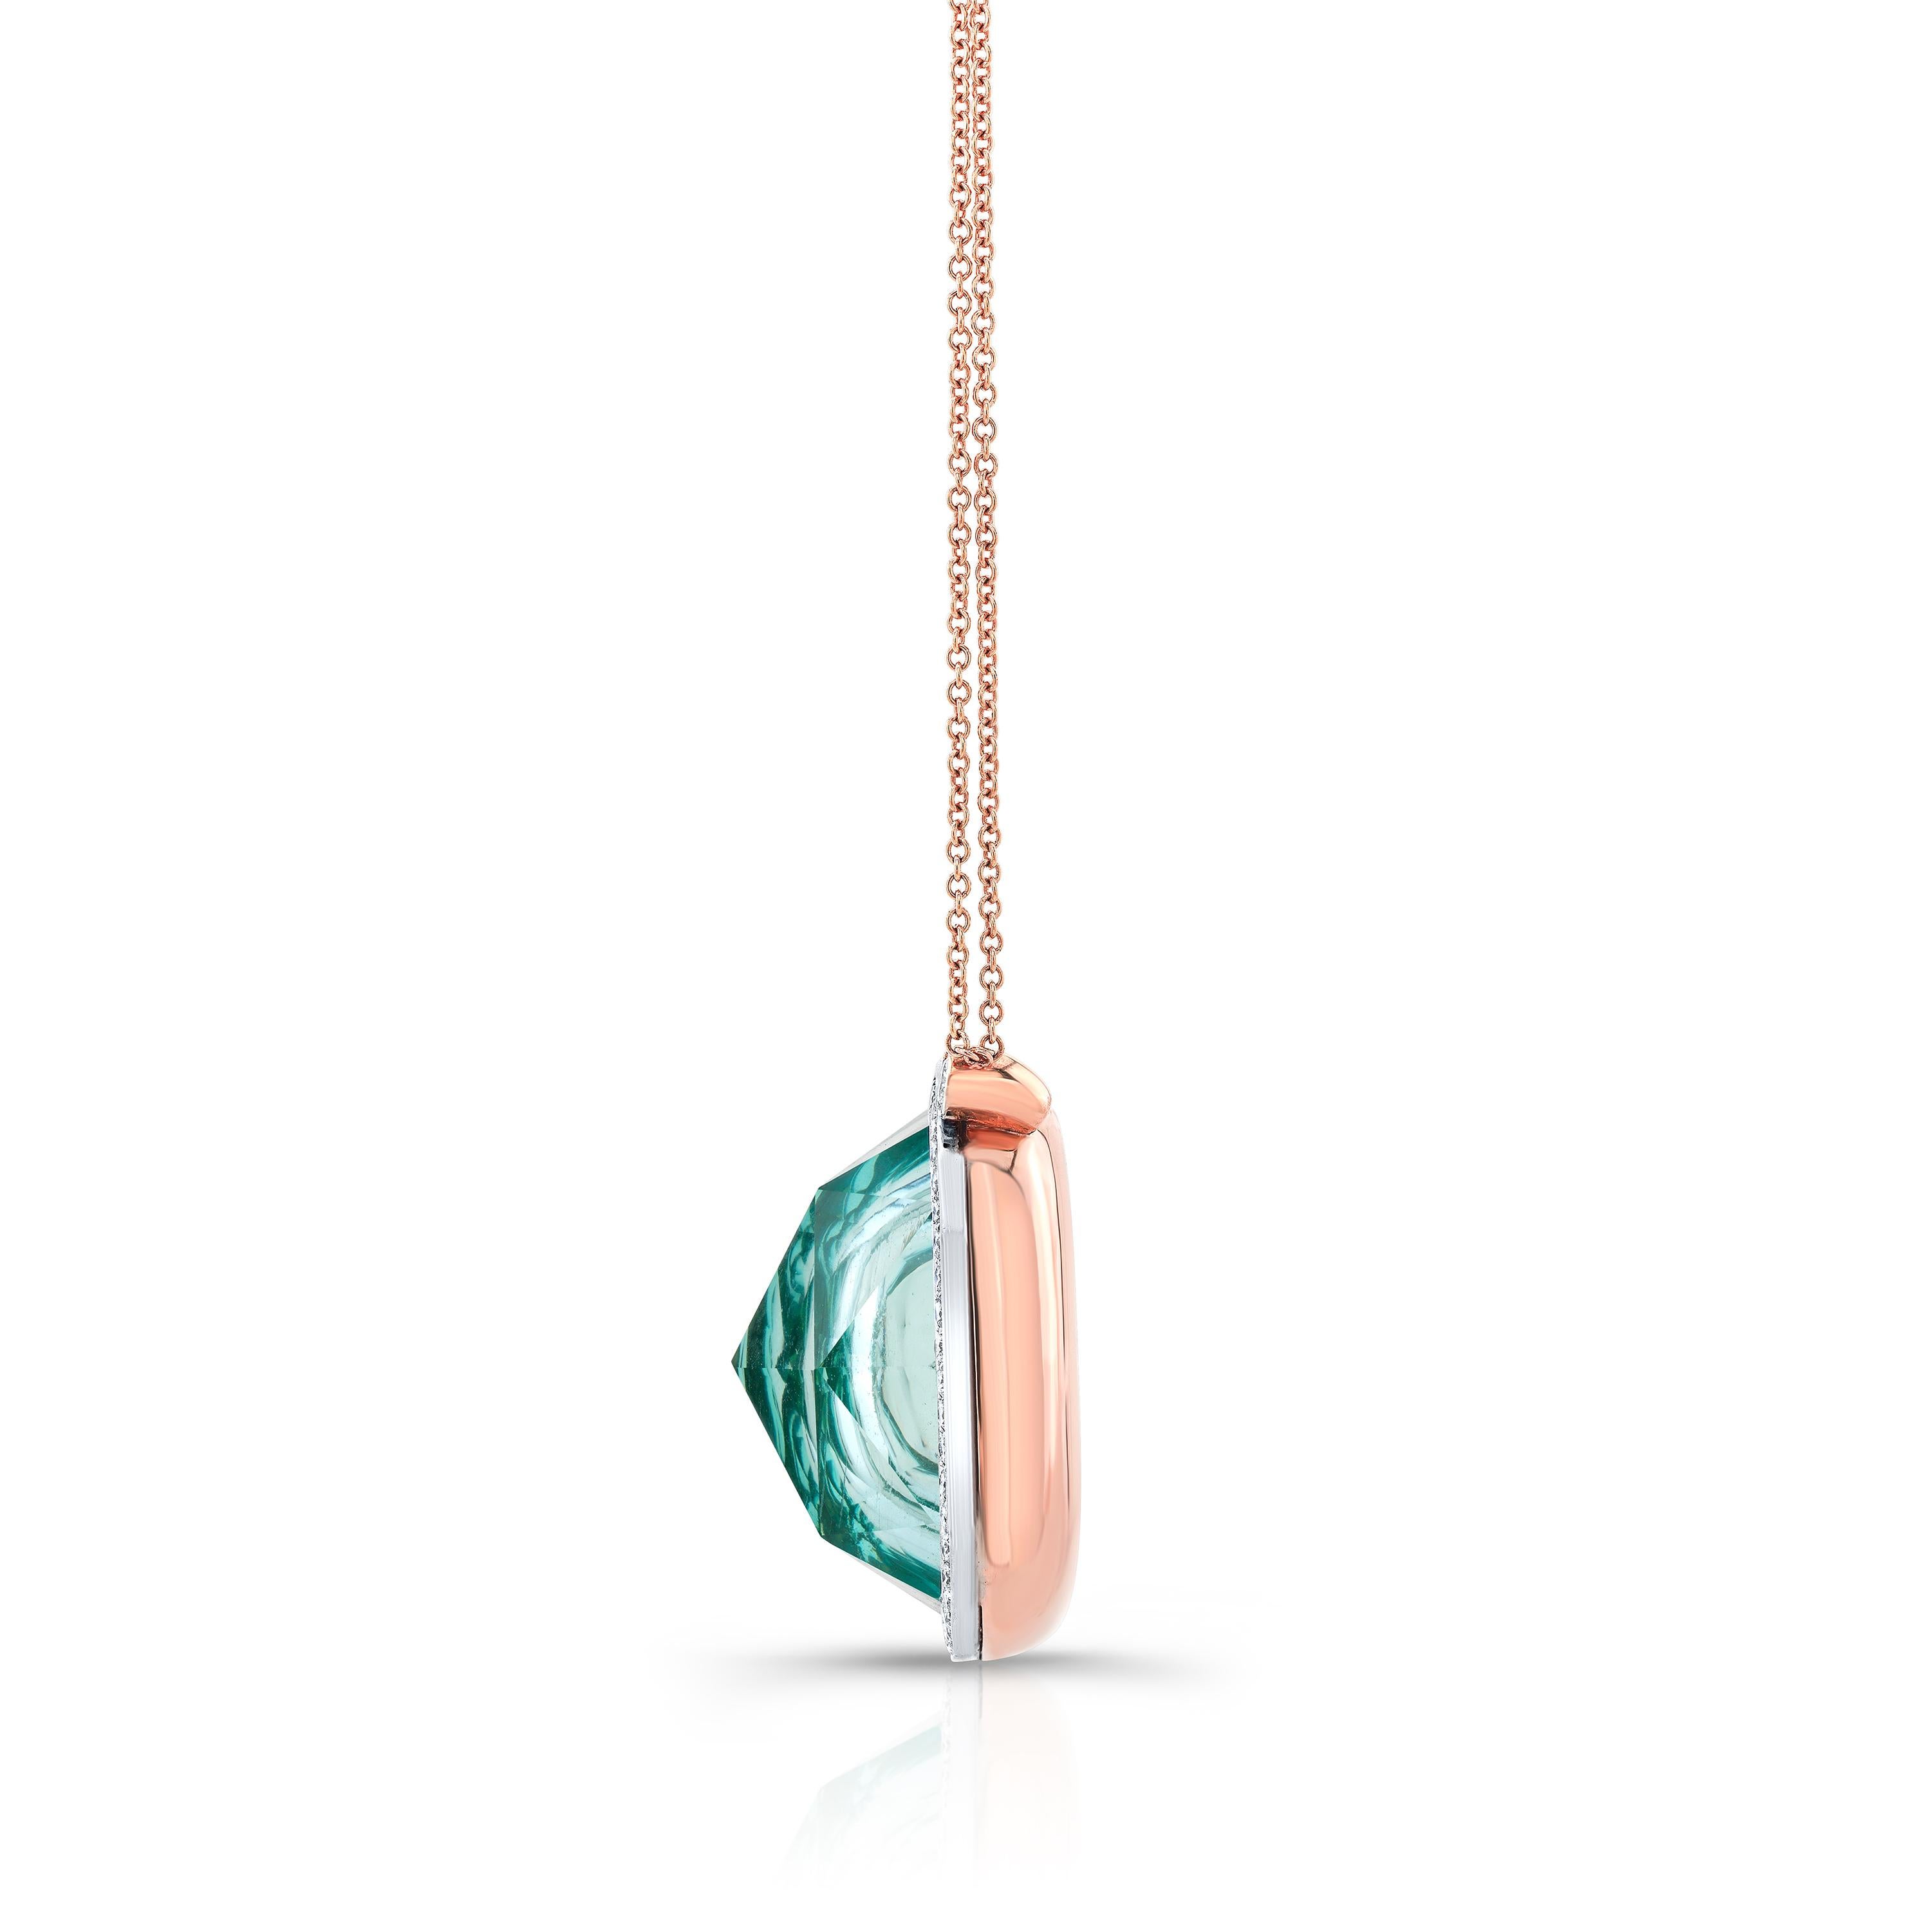 Amy Y's 18K rose gold, platinum, diamond, blue topaz painted enamel horse pendant necklace is a one-of-a-kind treasure for the ultimate animal lover.  This extraordinary pendant necklace was handmade by Amy's skilled European artisans in 2019. 